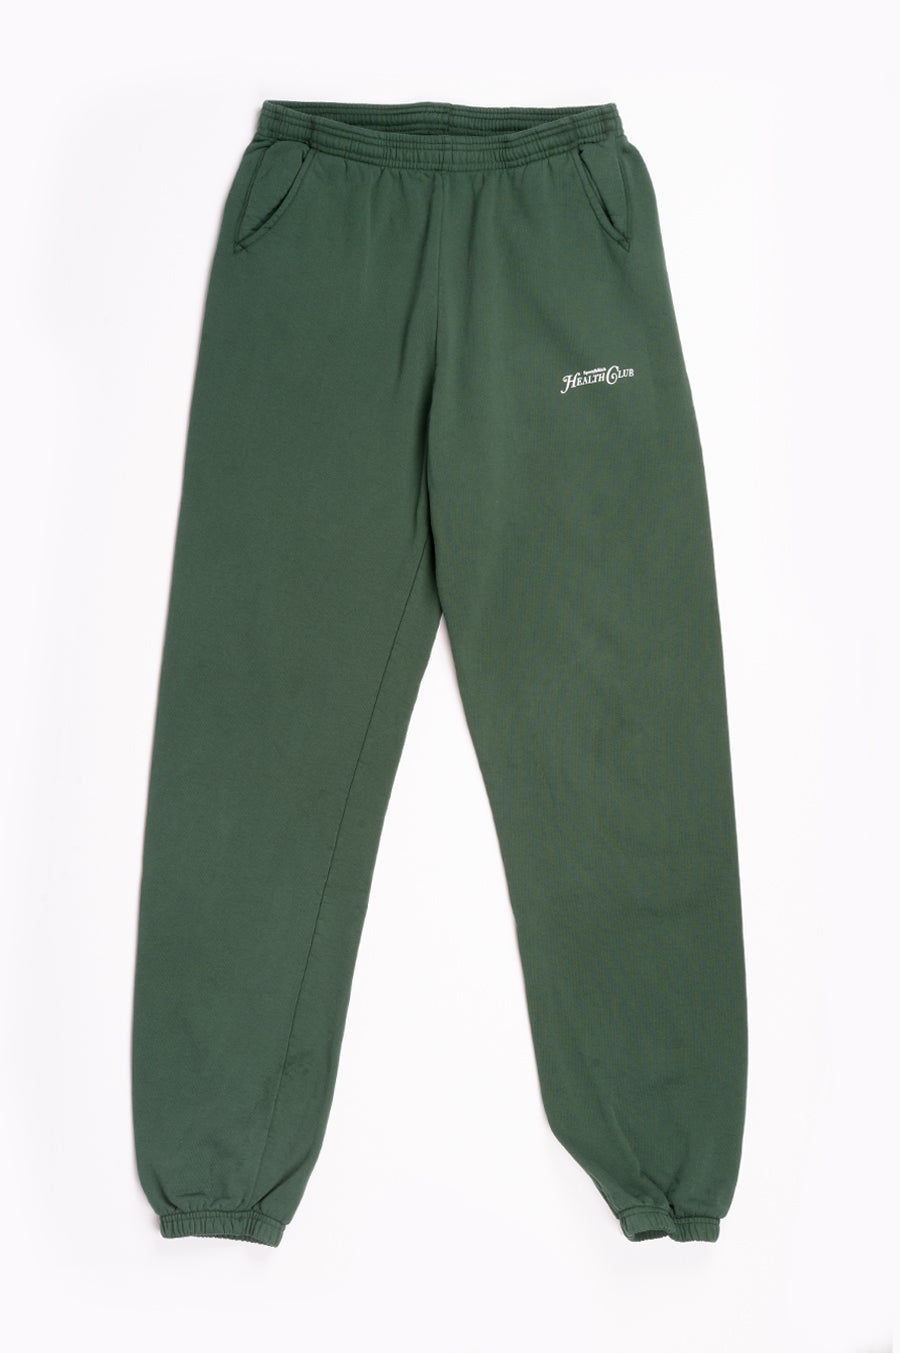 SPORTY AND RICH RIZZOLI SWEATPANTS FOREST GREEN